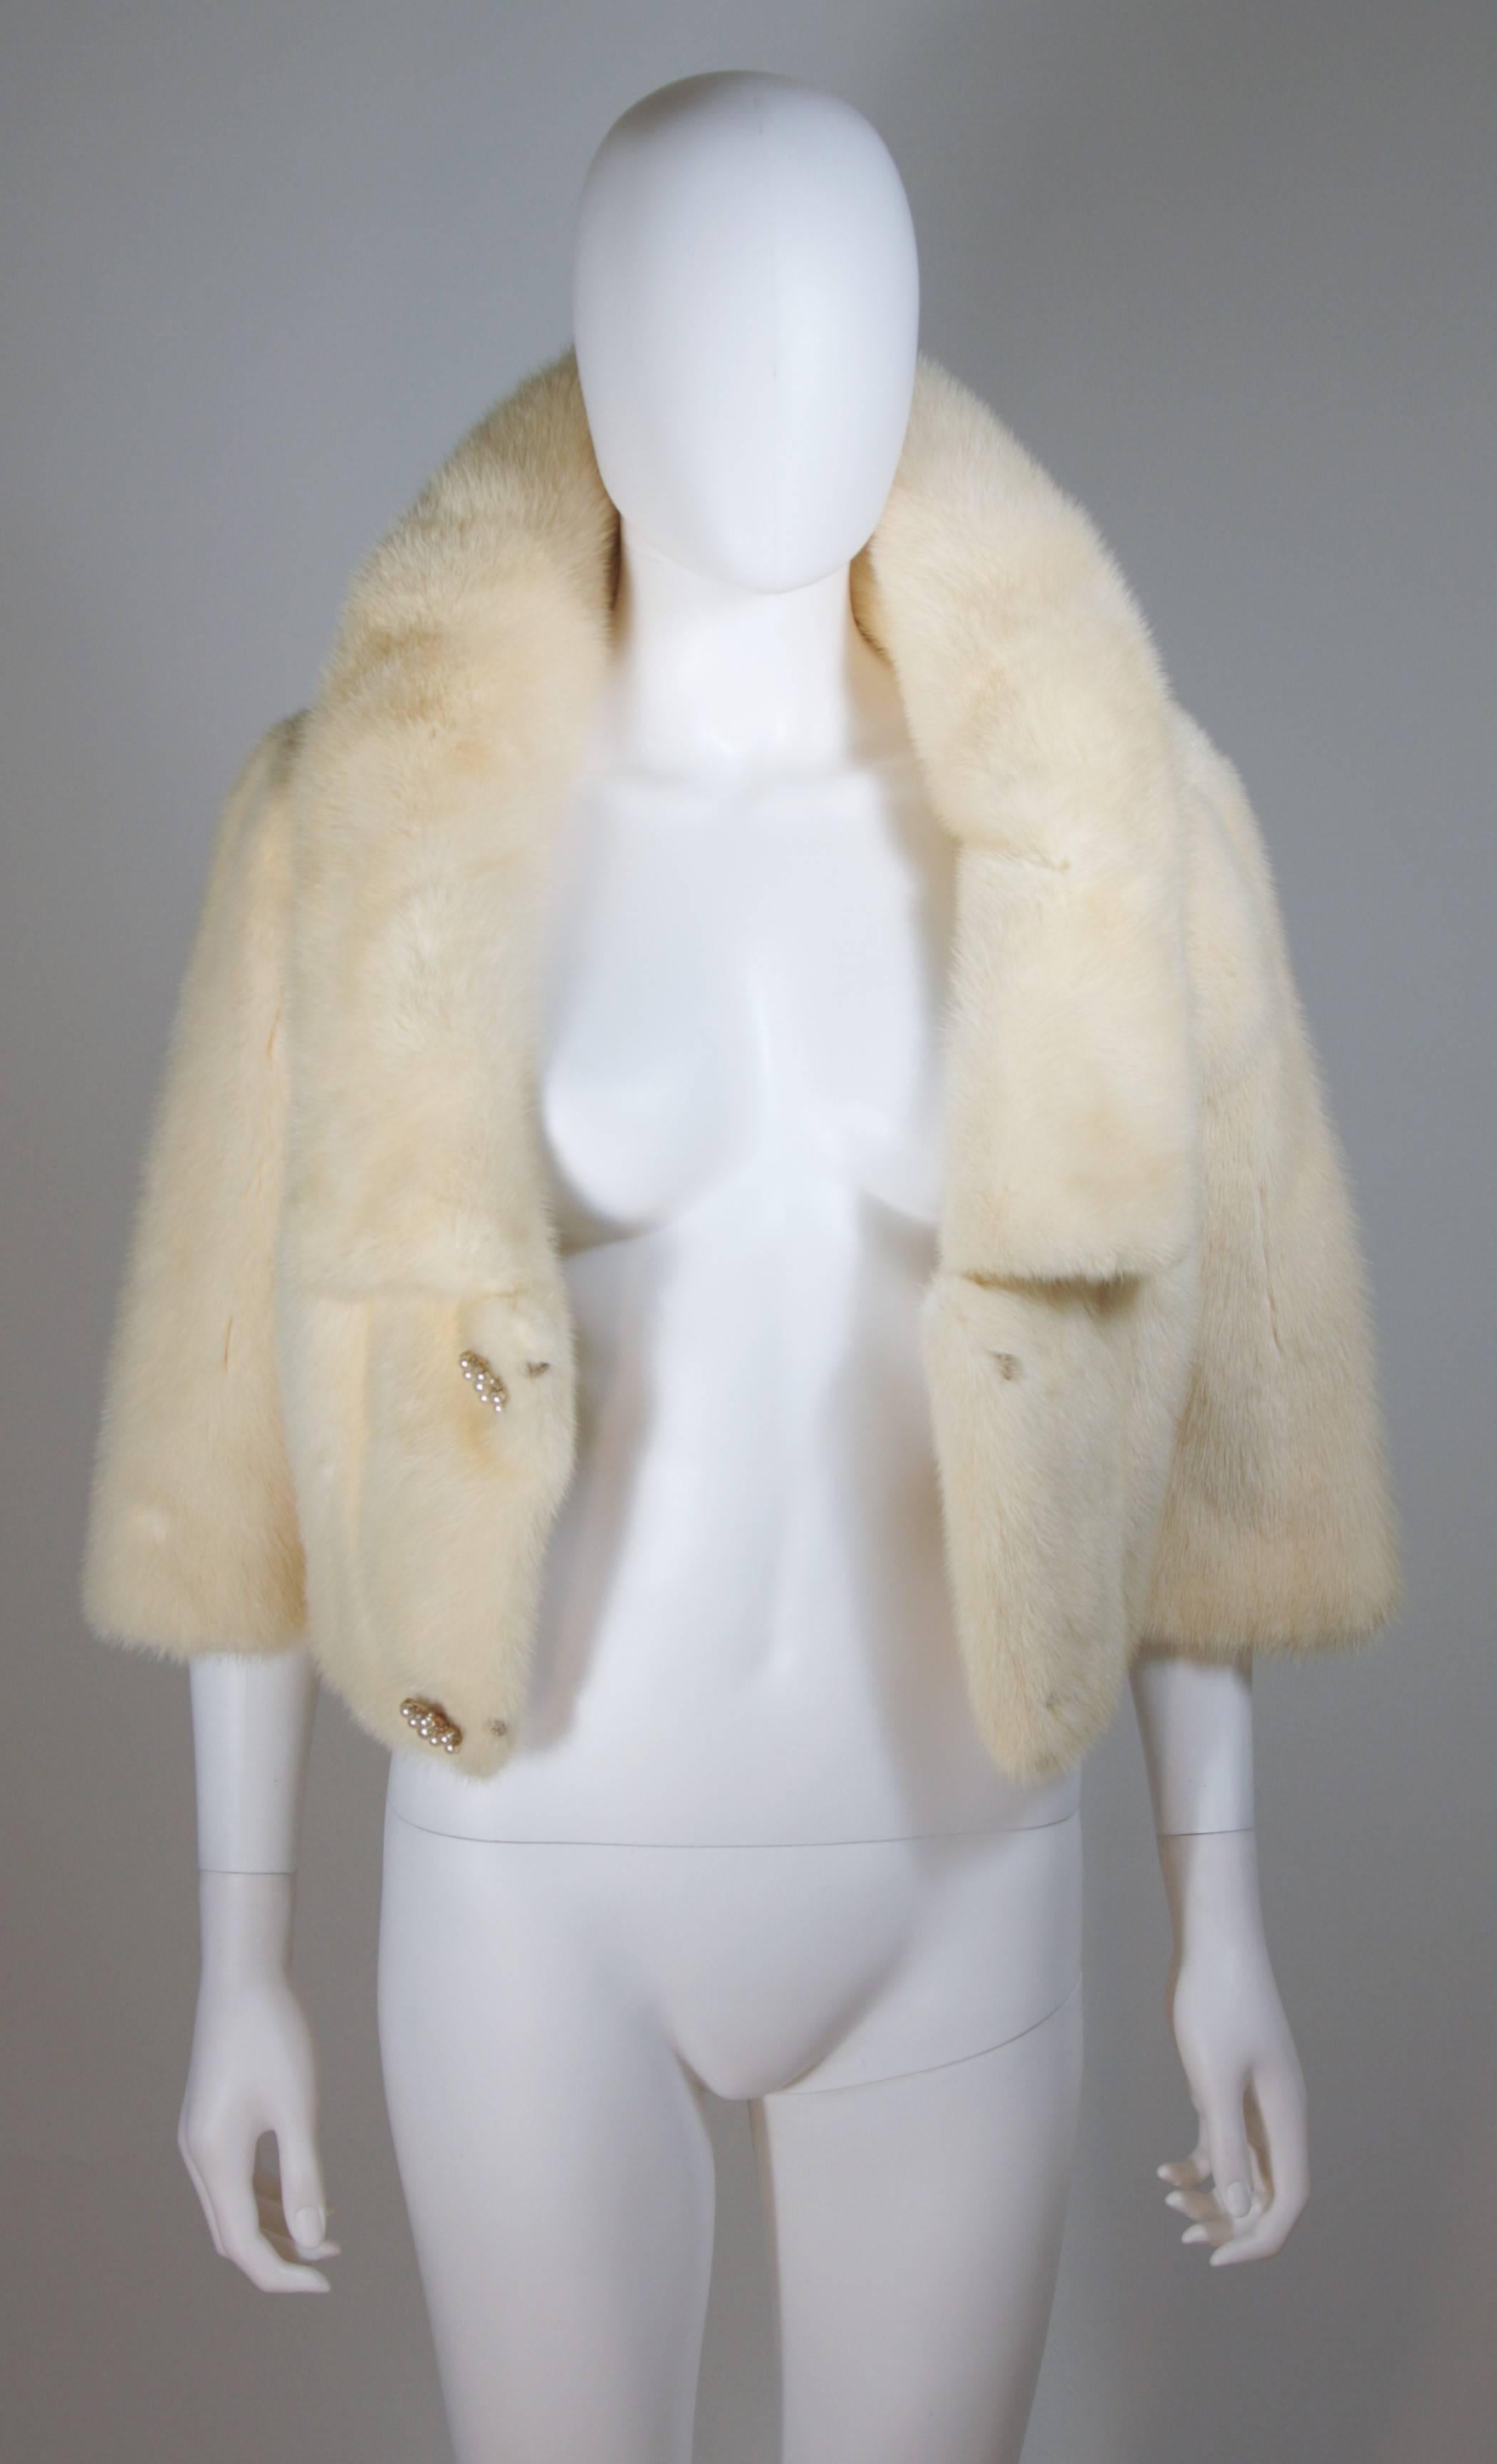 OLEG CASSINI Cream Mink Jacket with Rhinestone & Faux Pearl Buttons Size 6-8 For Sale 4